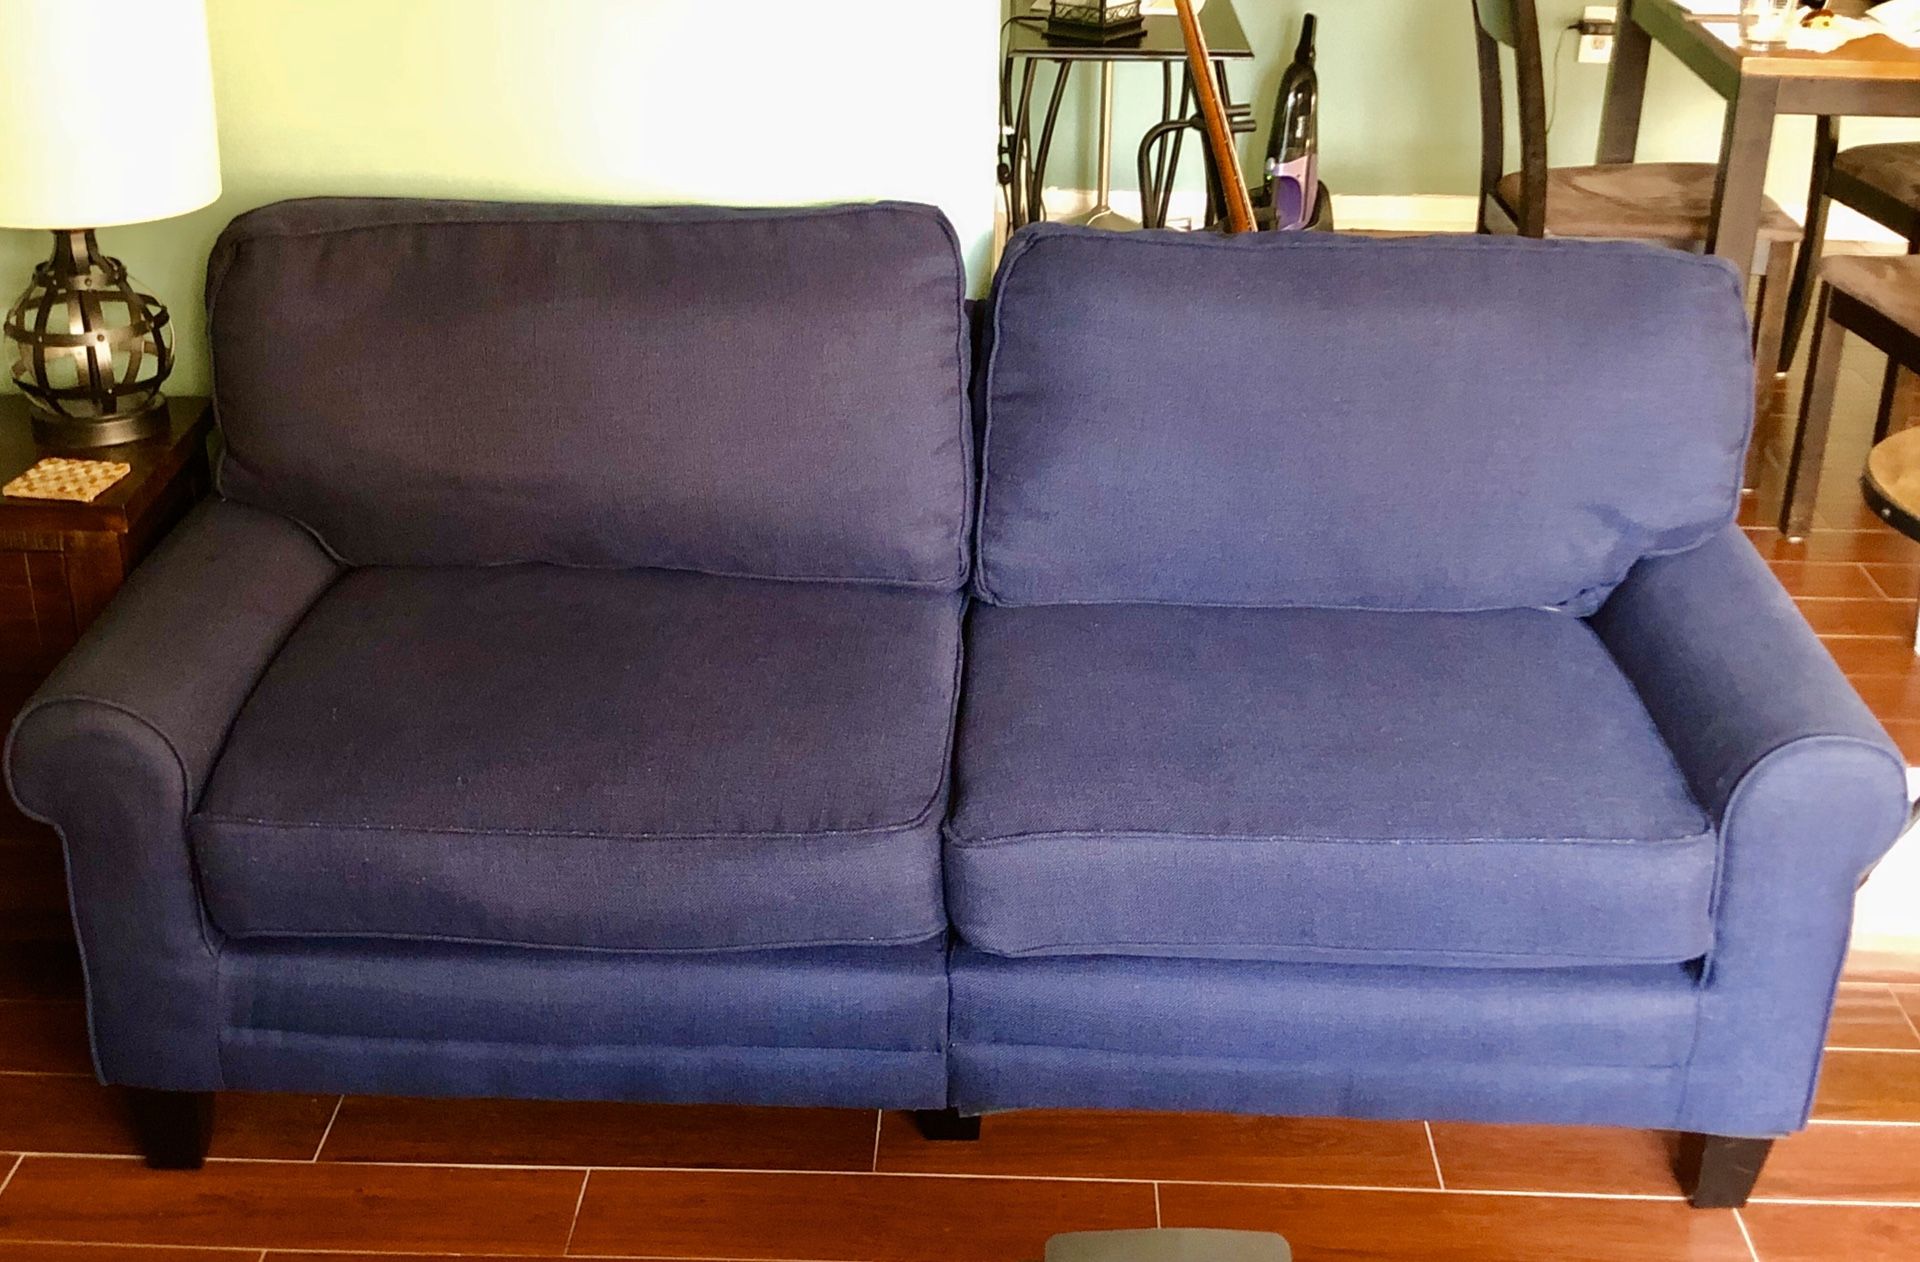 Clean, Navy Blue Couch